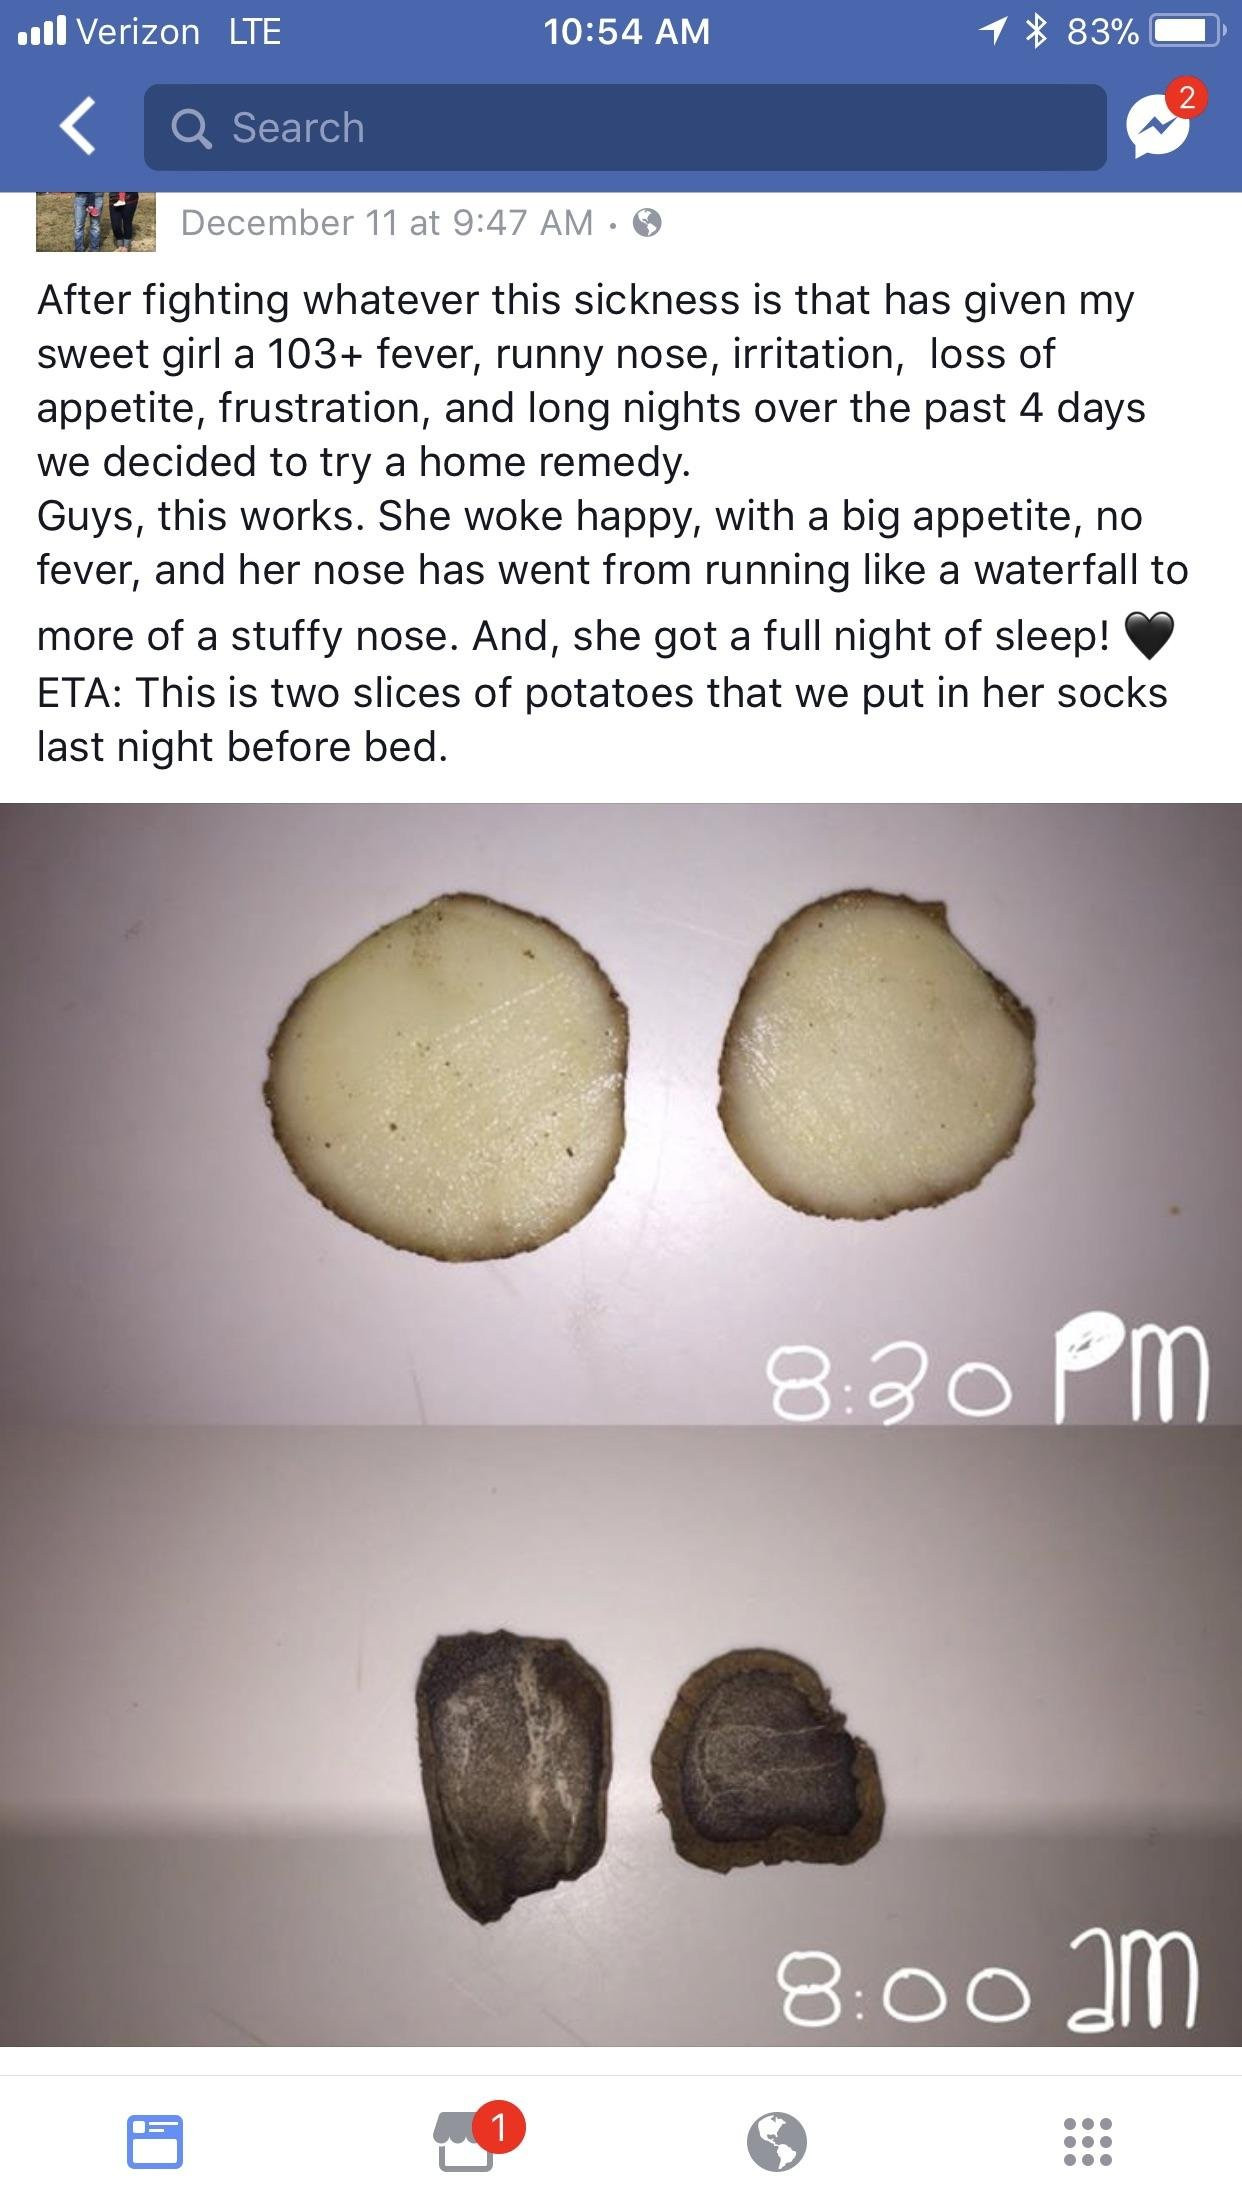 Potato On Feet
 The potatoes curing disease thing showed up in my news